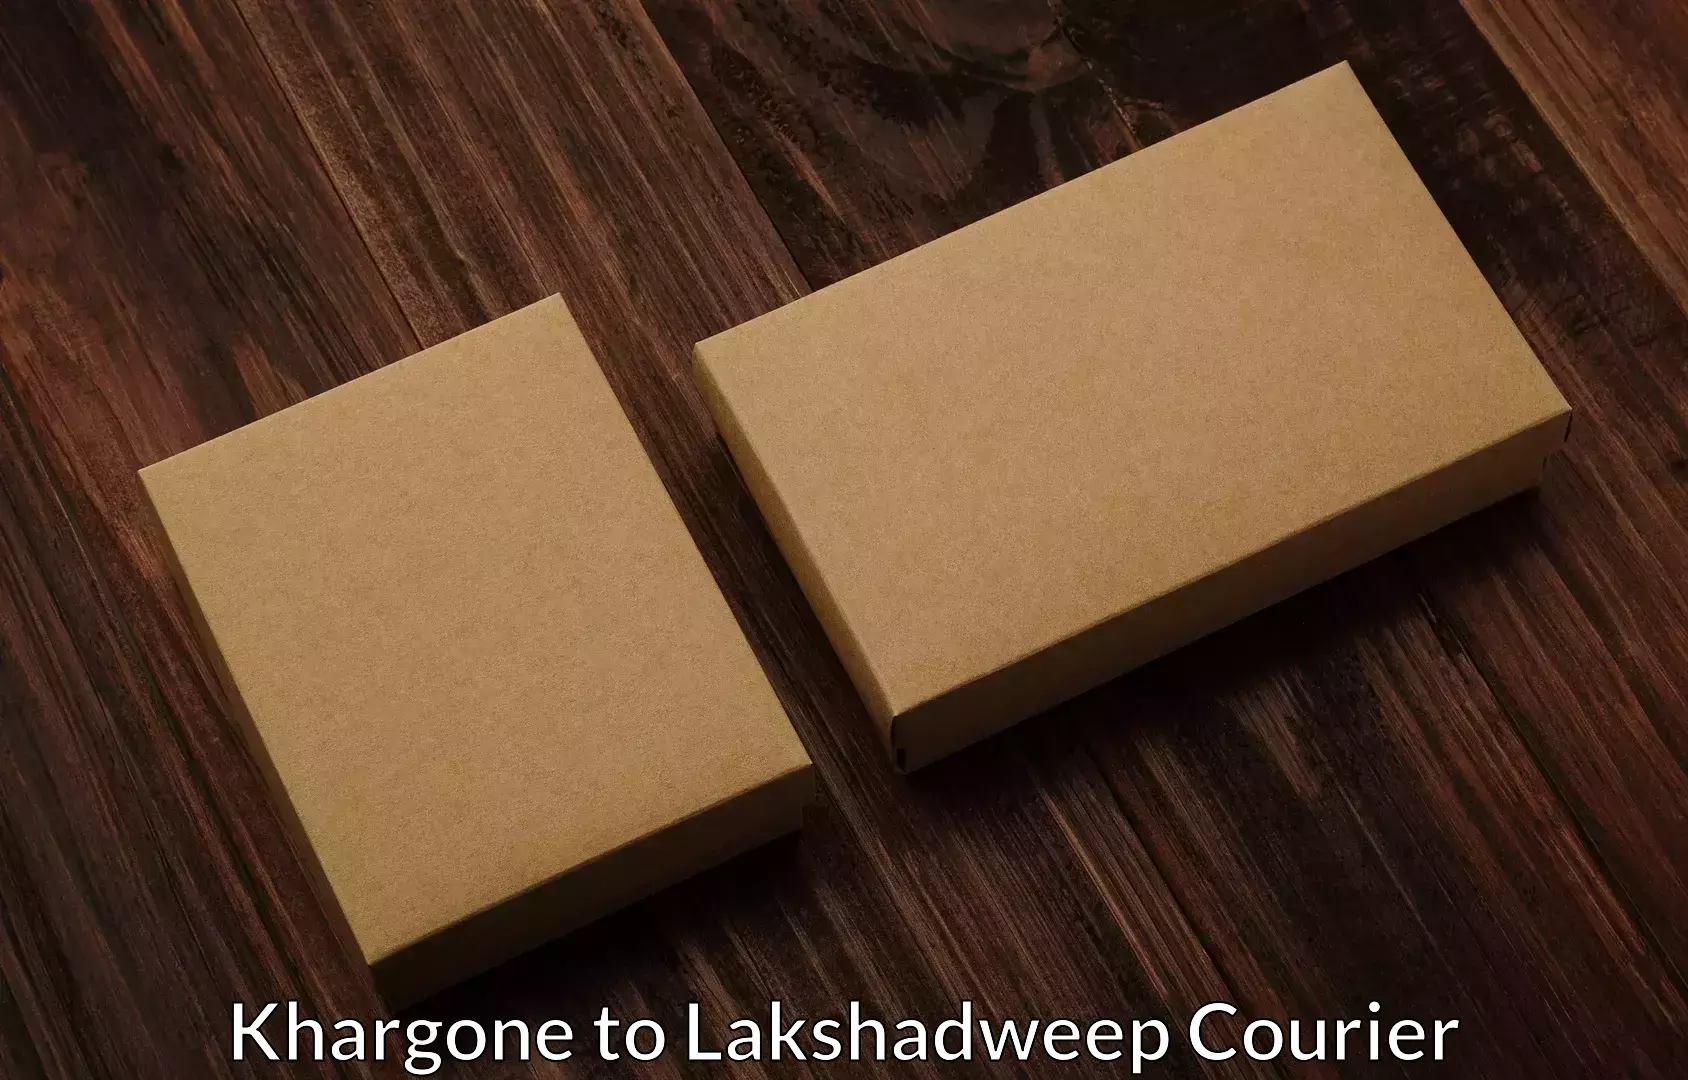 Furniture delivery service Khargone to Lakshadweep